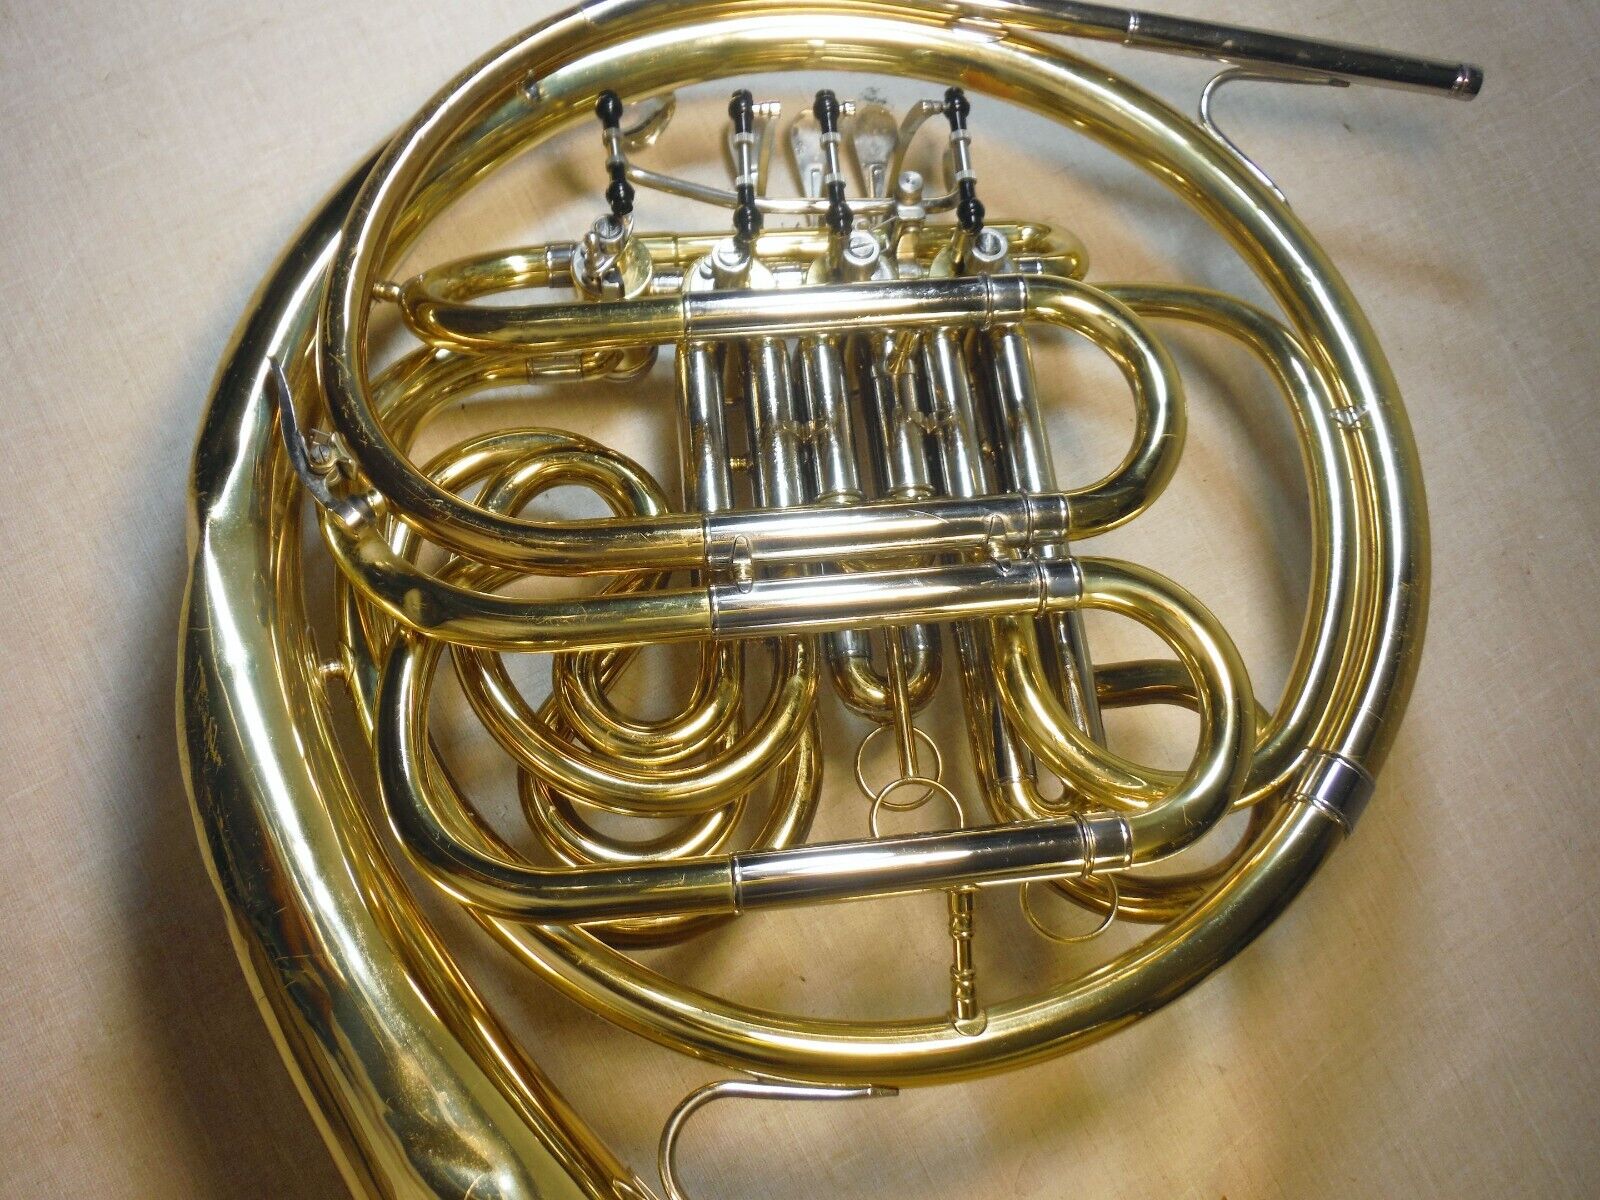 JUPITER JHR-852 DOUBLE FRENCH HORN BRASS WORKING GOOD W/DENTS CASE MOUTHPIECE 8